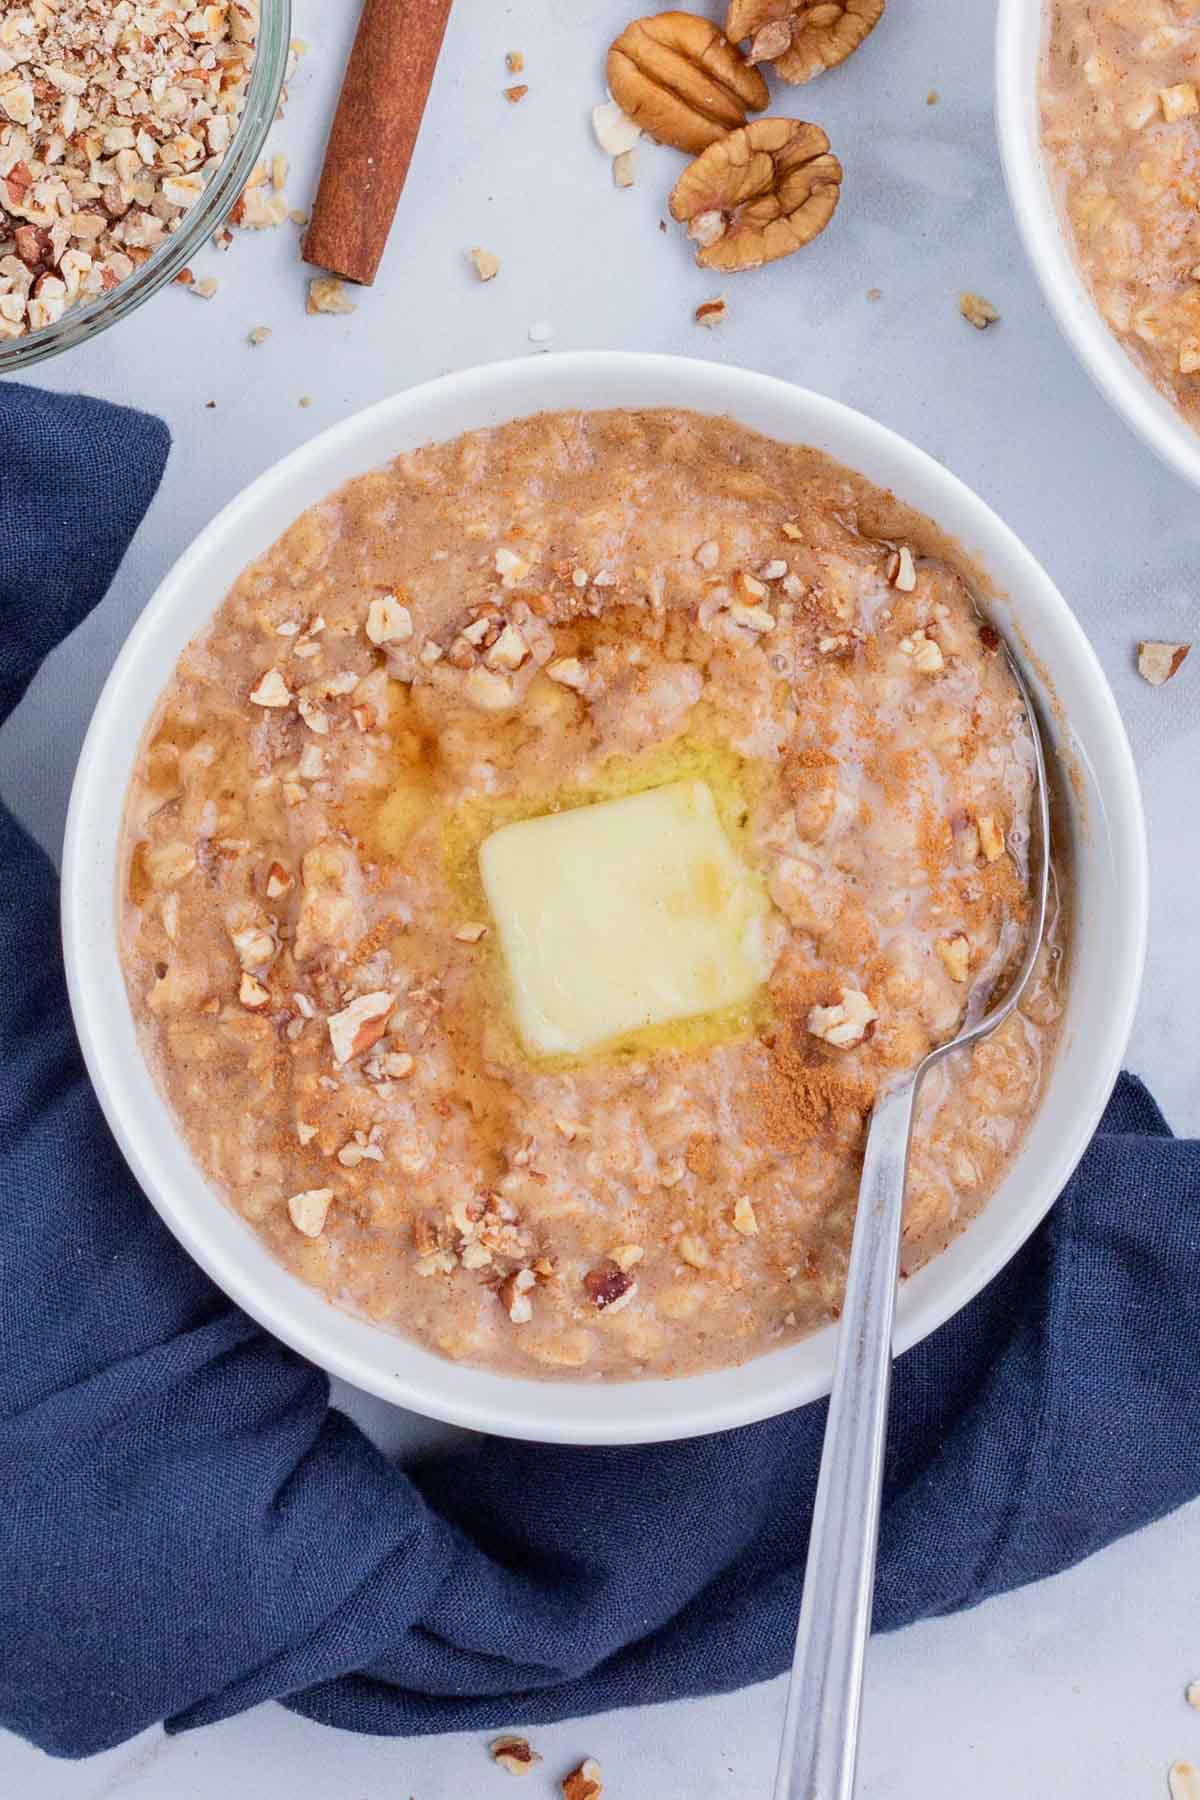 A spoon stirs butter into a bowl of oatmeal.